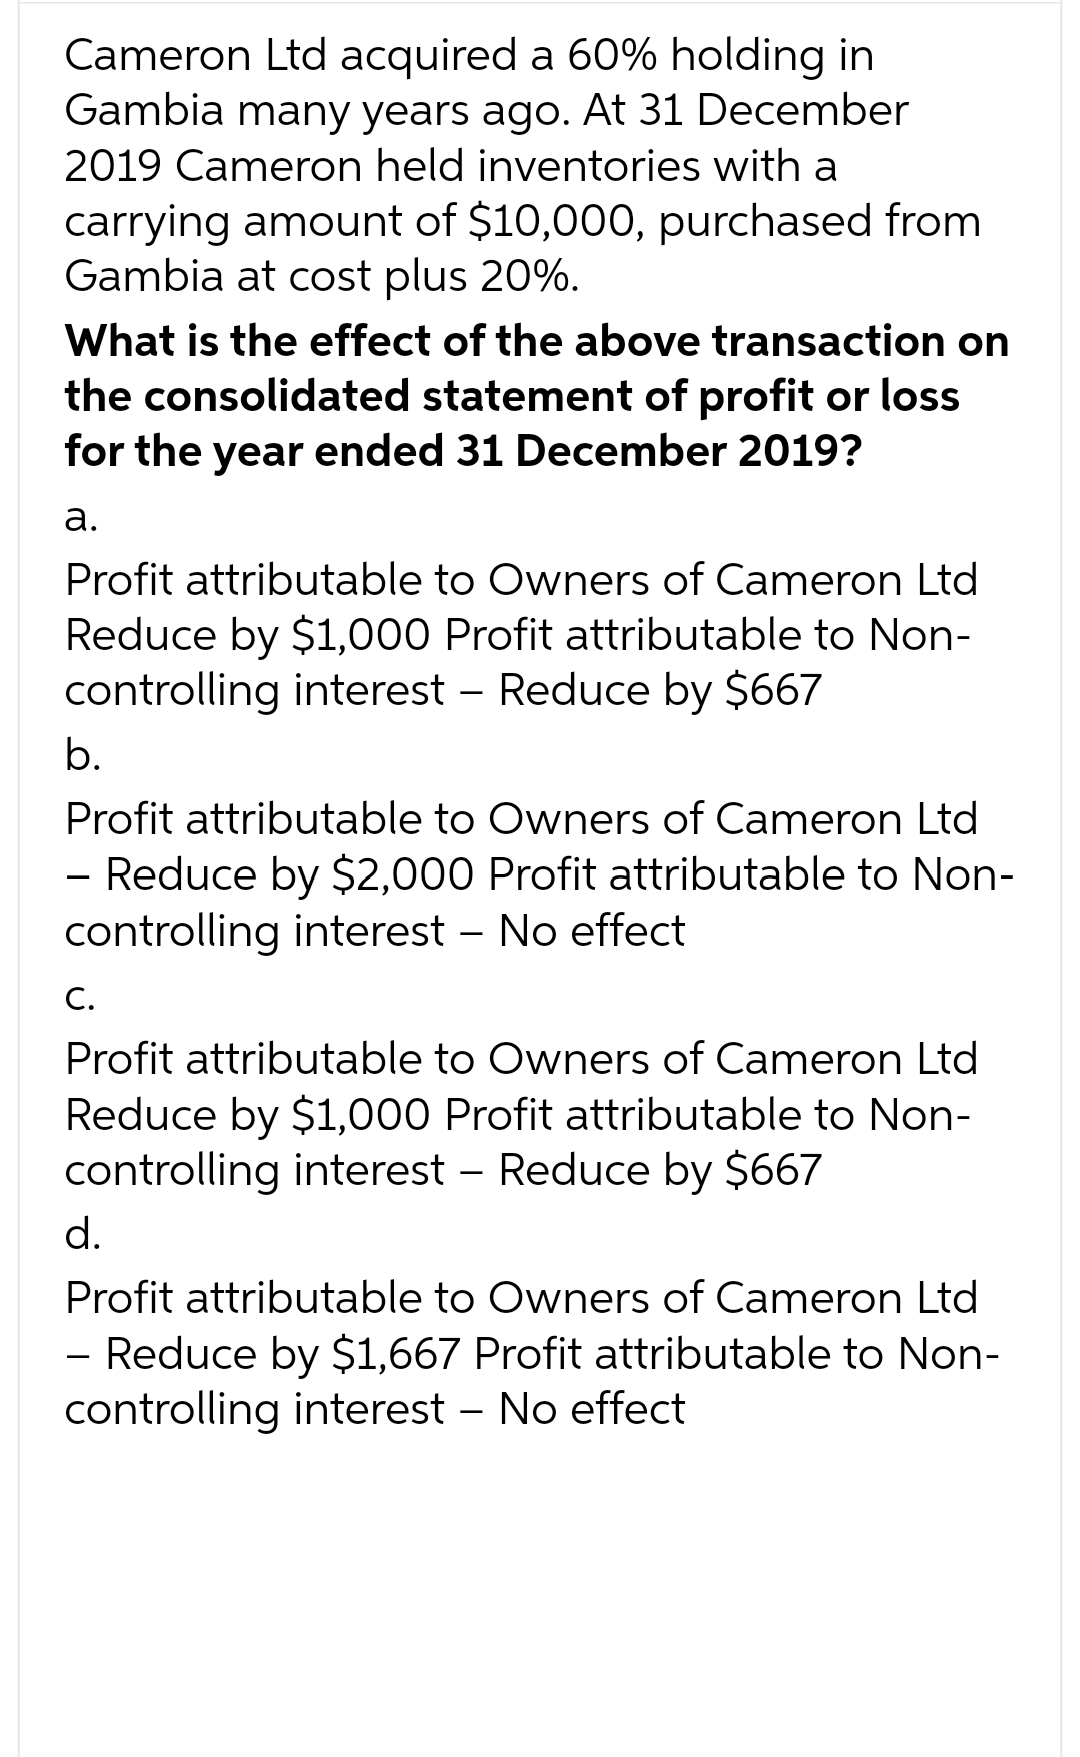 Cameron Ltd acquired a 60% holding in
Gambia many years ago. At 31 December
2019 Cameron held inventories with a
carrying amount of $10,000, purchased from
Gambia at cost plus 20%.
What is the effect of the above transaction on
the consolidated statement of profit or loss
for the year ended 31 December 2019?
a.
Profit attributable to Owners of Cameron Ltd
Reduce by $1,000 Profit attributable to Non-
controlling interest - Reduce by $667
b.
Profit attributable to Owners of Cameron Ltd
- Reduce by $2,000 Profit attributable to Non-
controlling interest - No effect
C.
Profit attributable to Owners of Cameron Ltd
Reduce by $1,000 Profit attributable to Non-
controlling interest - Reduce by $667
d.
Profit attributable to Owners of Cameron Ltd
- Reduce by $1,667 Profit attributable to Non-
controlling interest - No effect